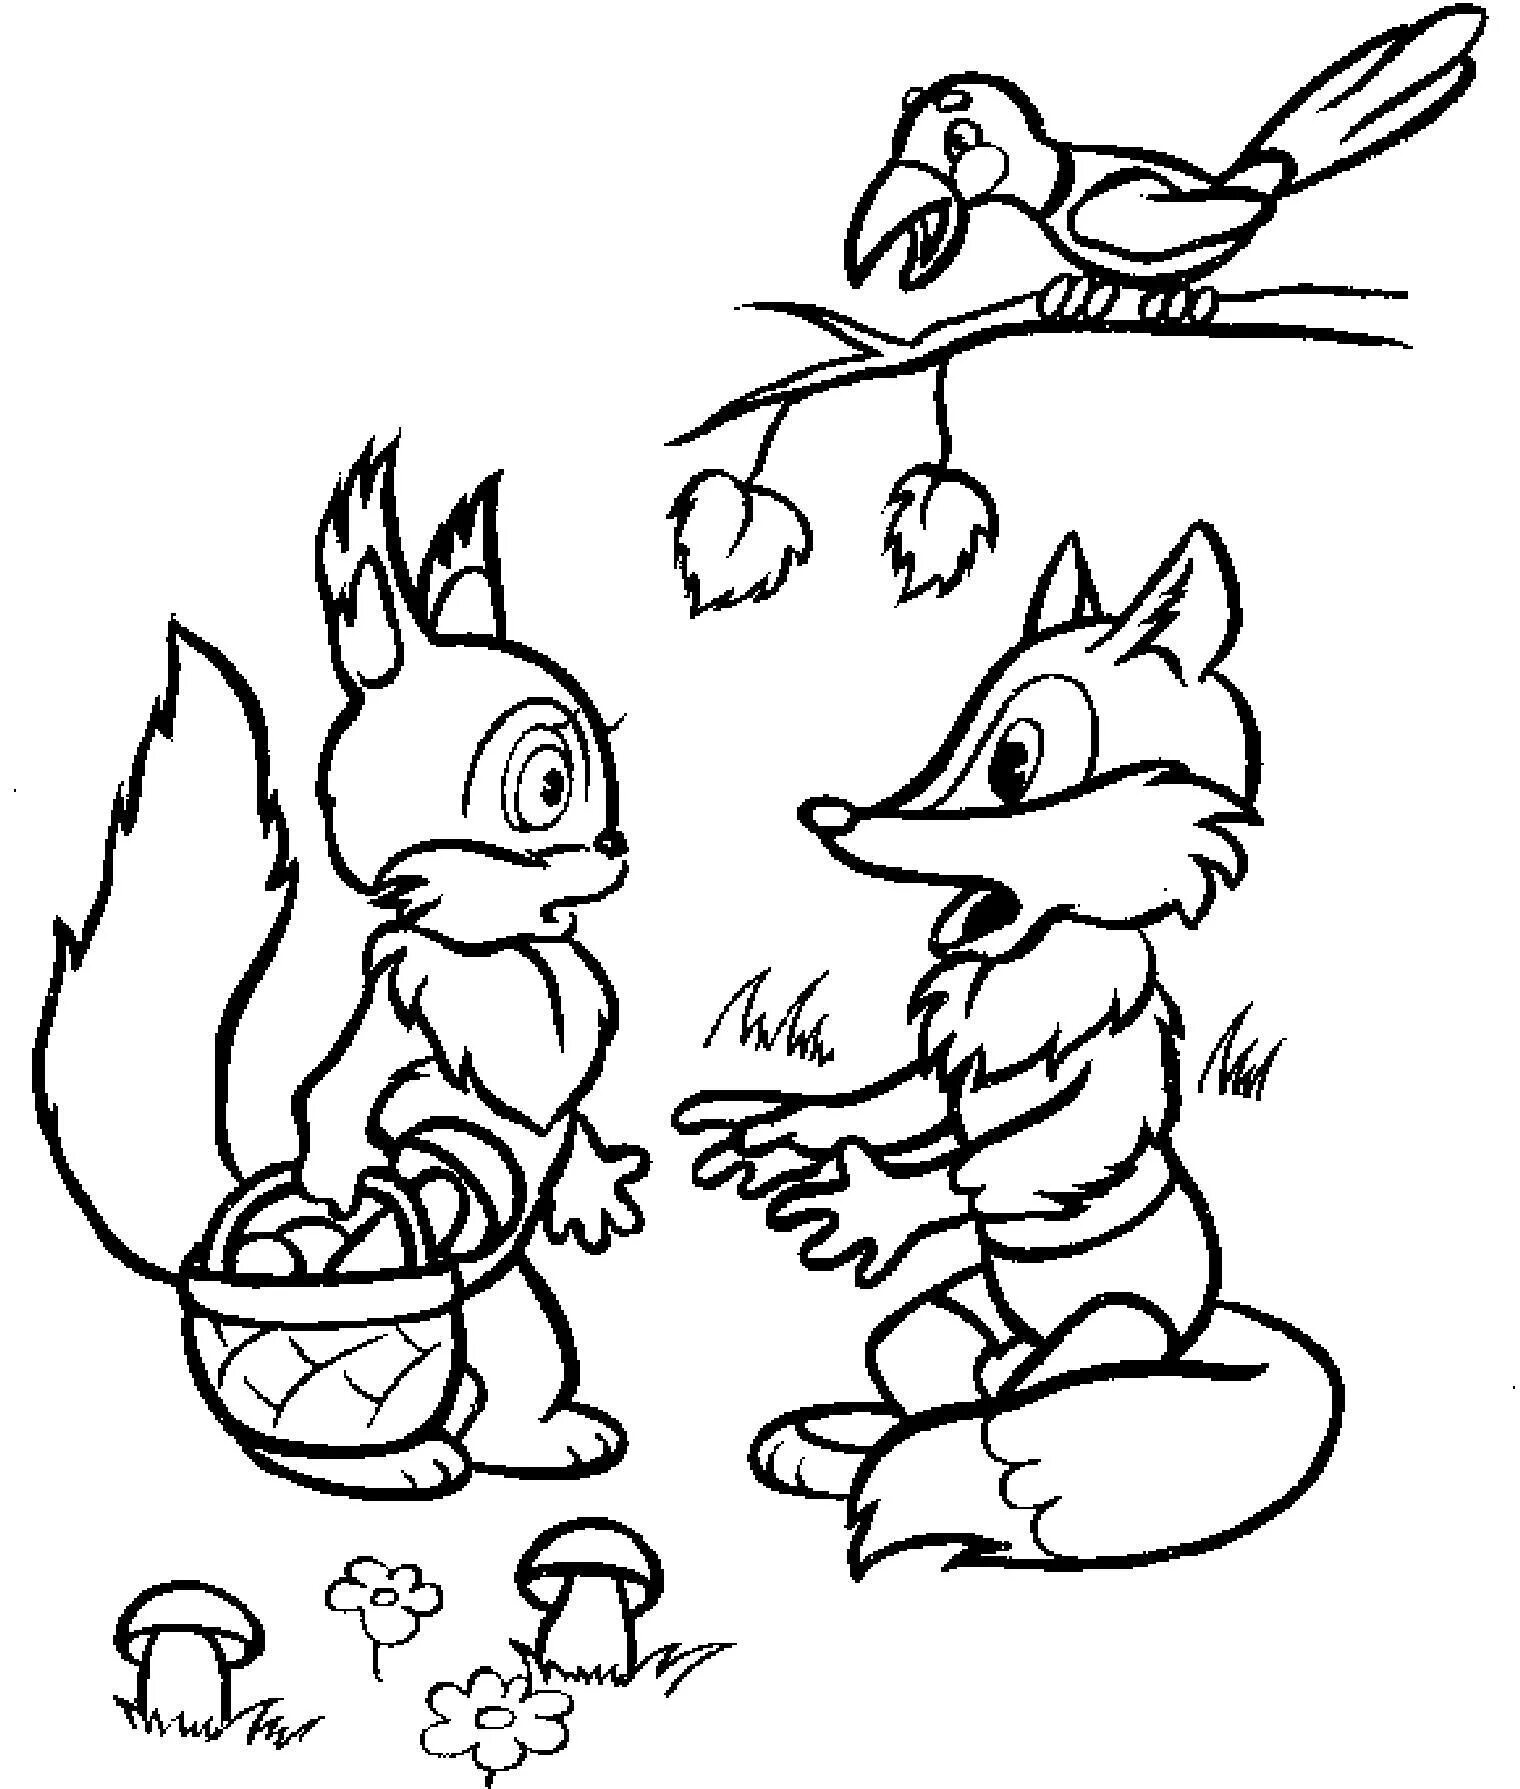 Fabulous hare and squirrel coloring page